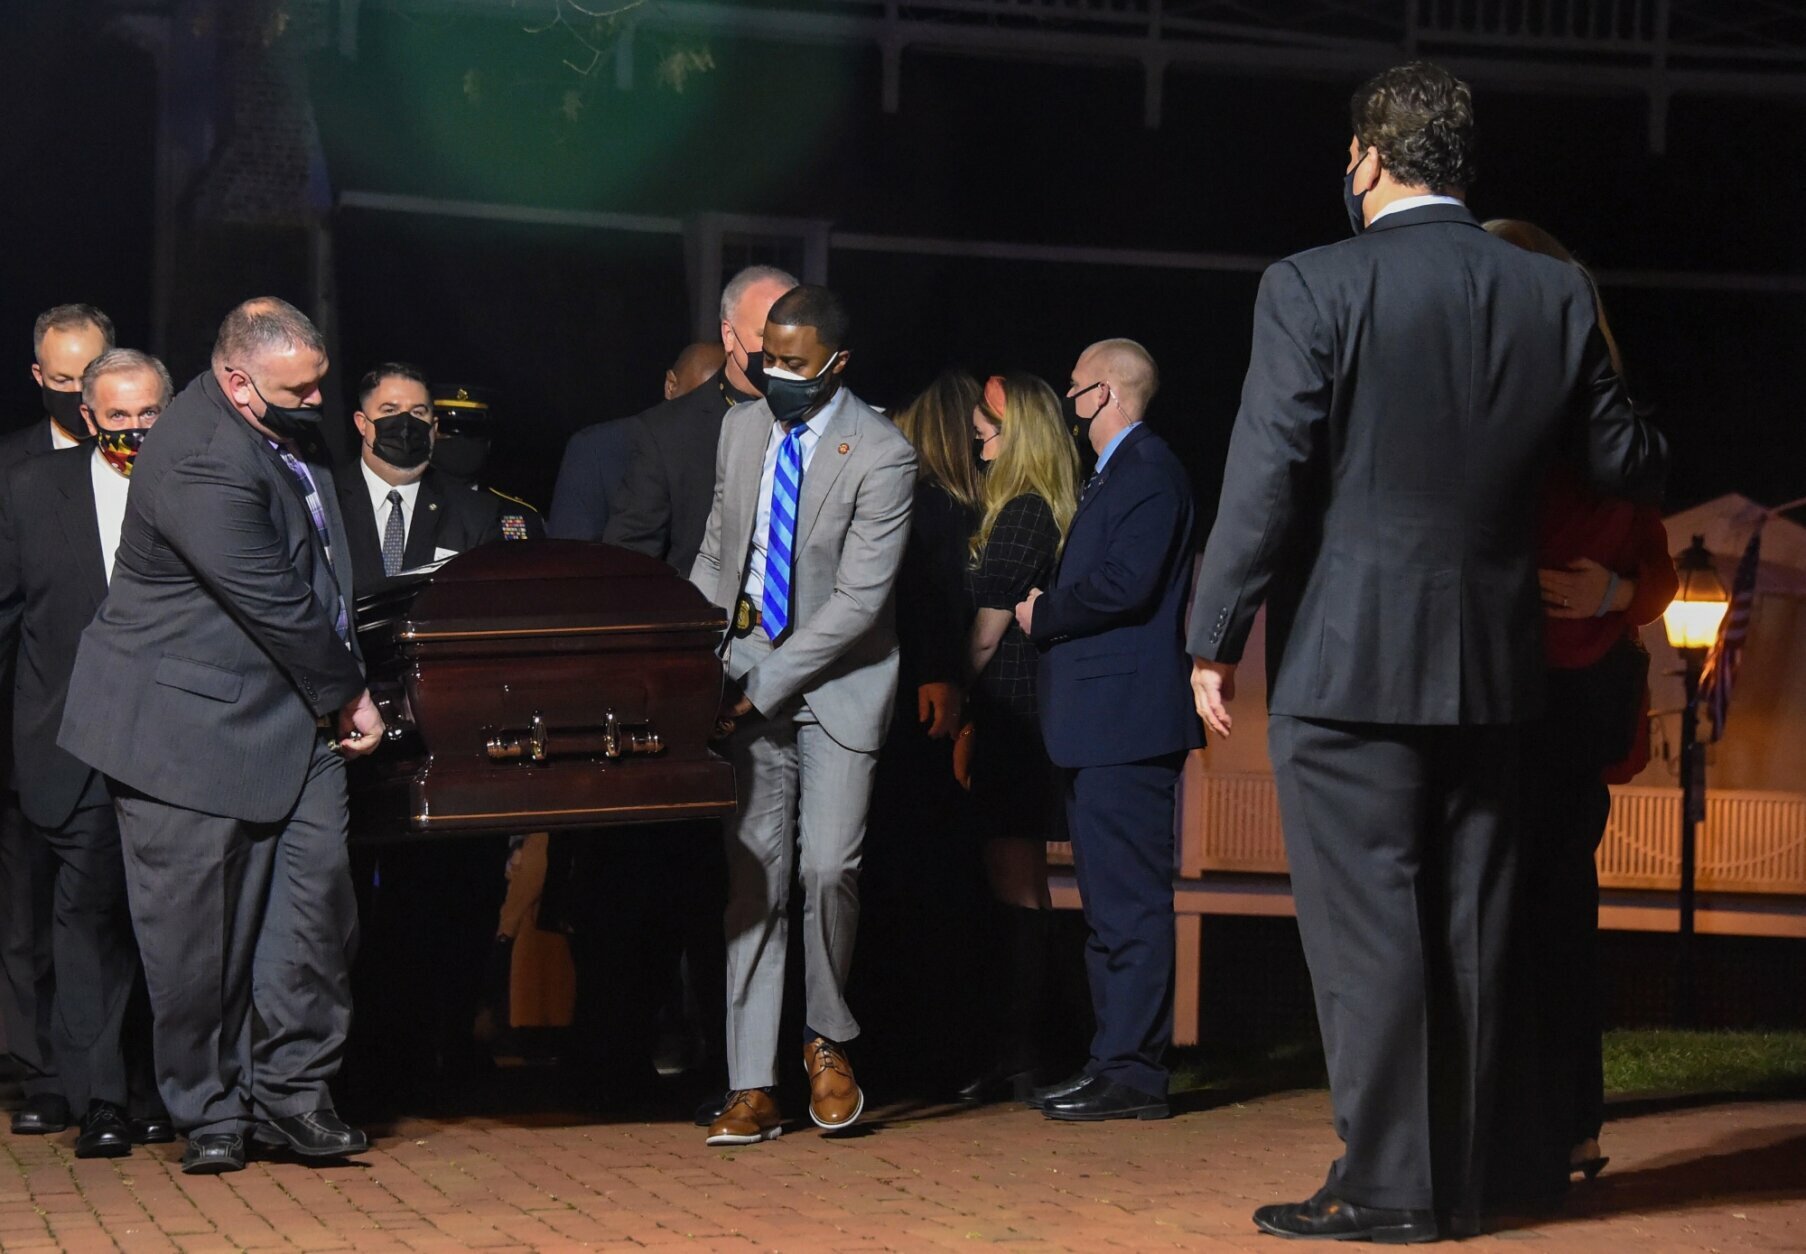 Former Maryland Senate President Thomas V. "Mike" Miller, who died following complications from cancer last week, is transported into the Maryland State House for a final viewing, Thursday, Jan. 21, 2021. (Ulysses Muñoz/The Baltimore Sun via AP)